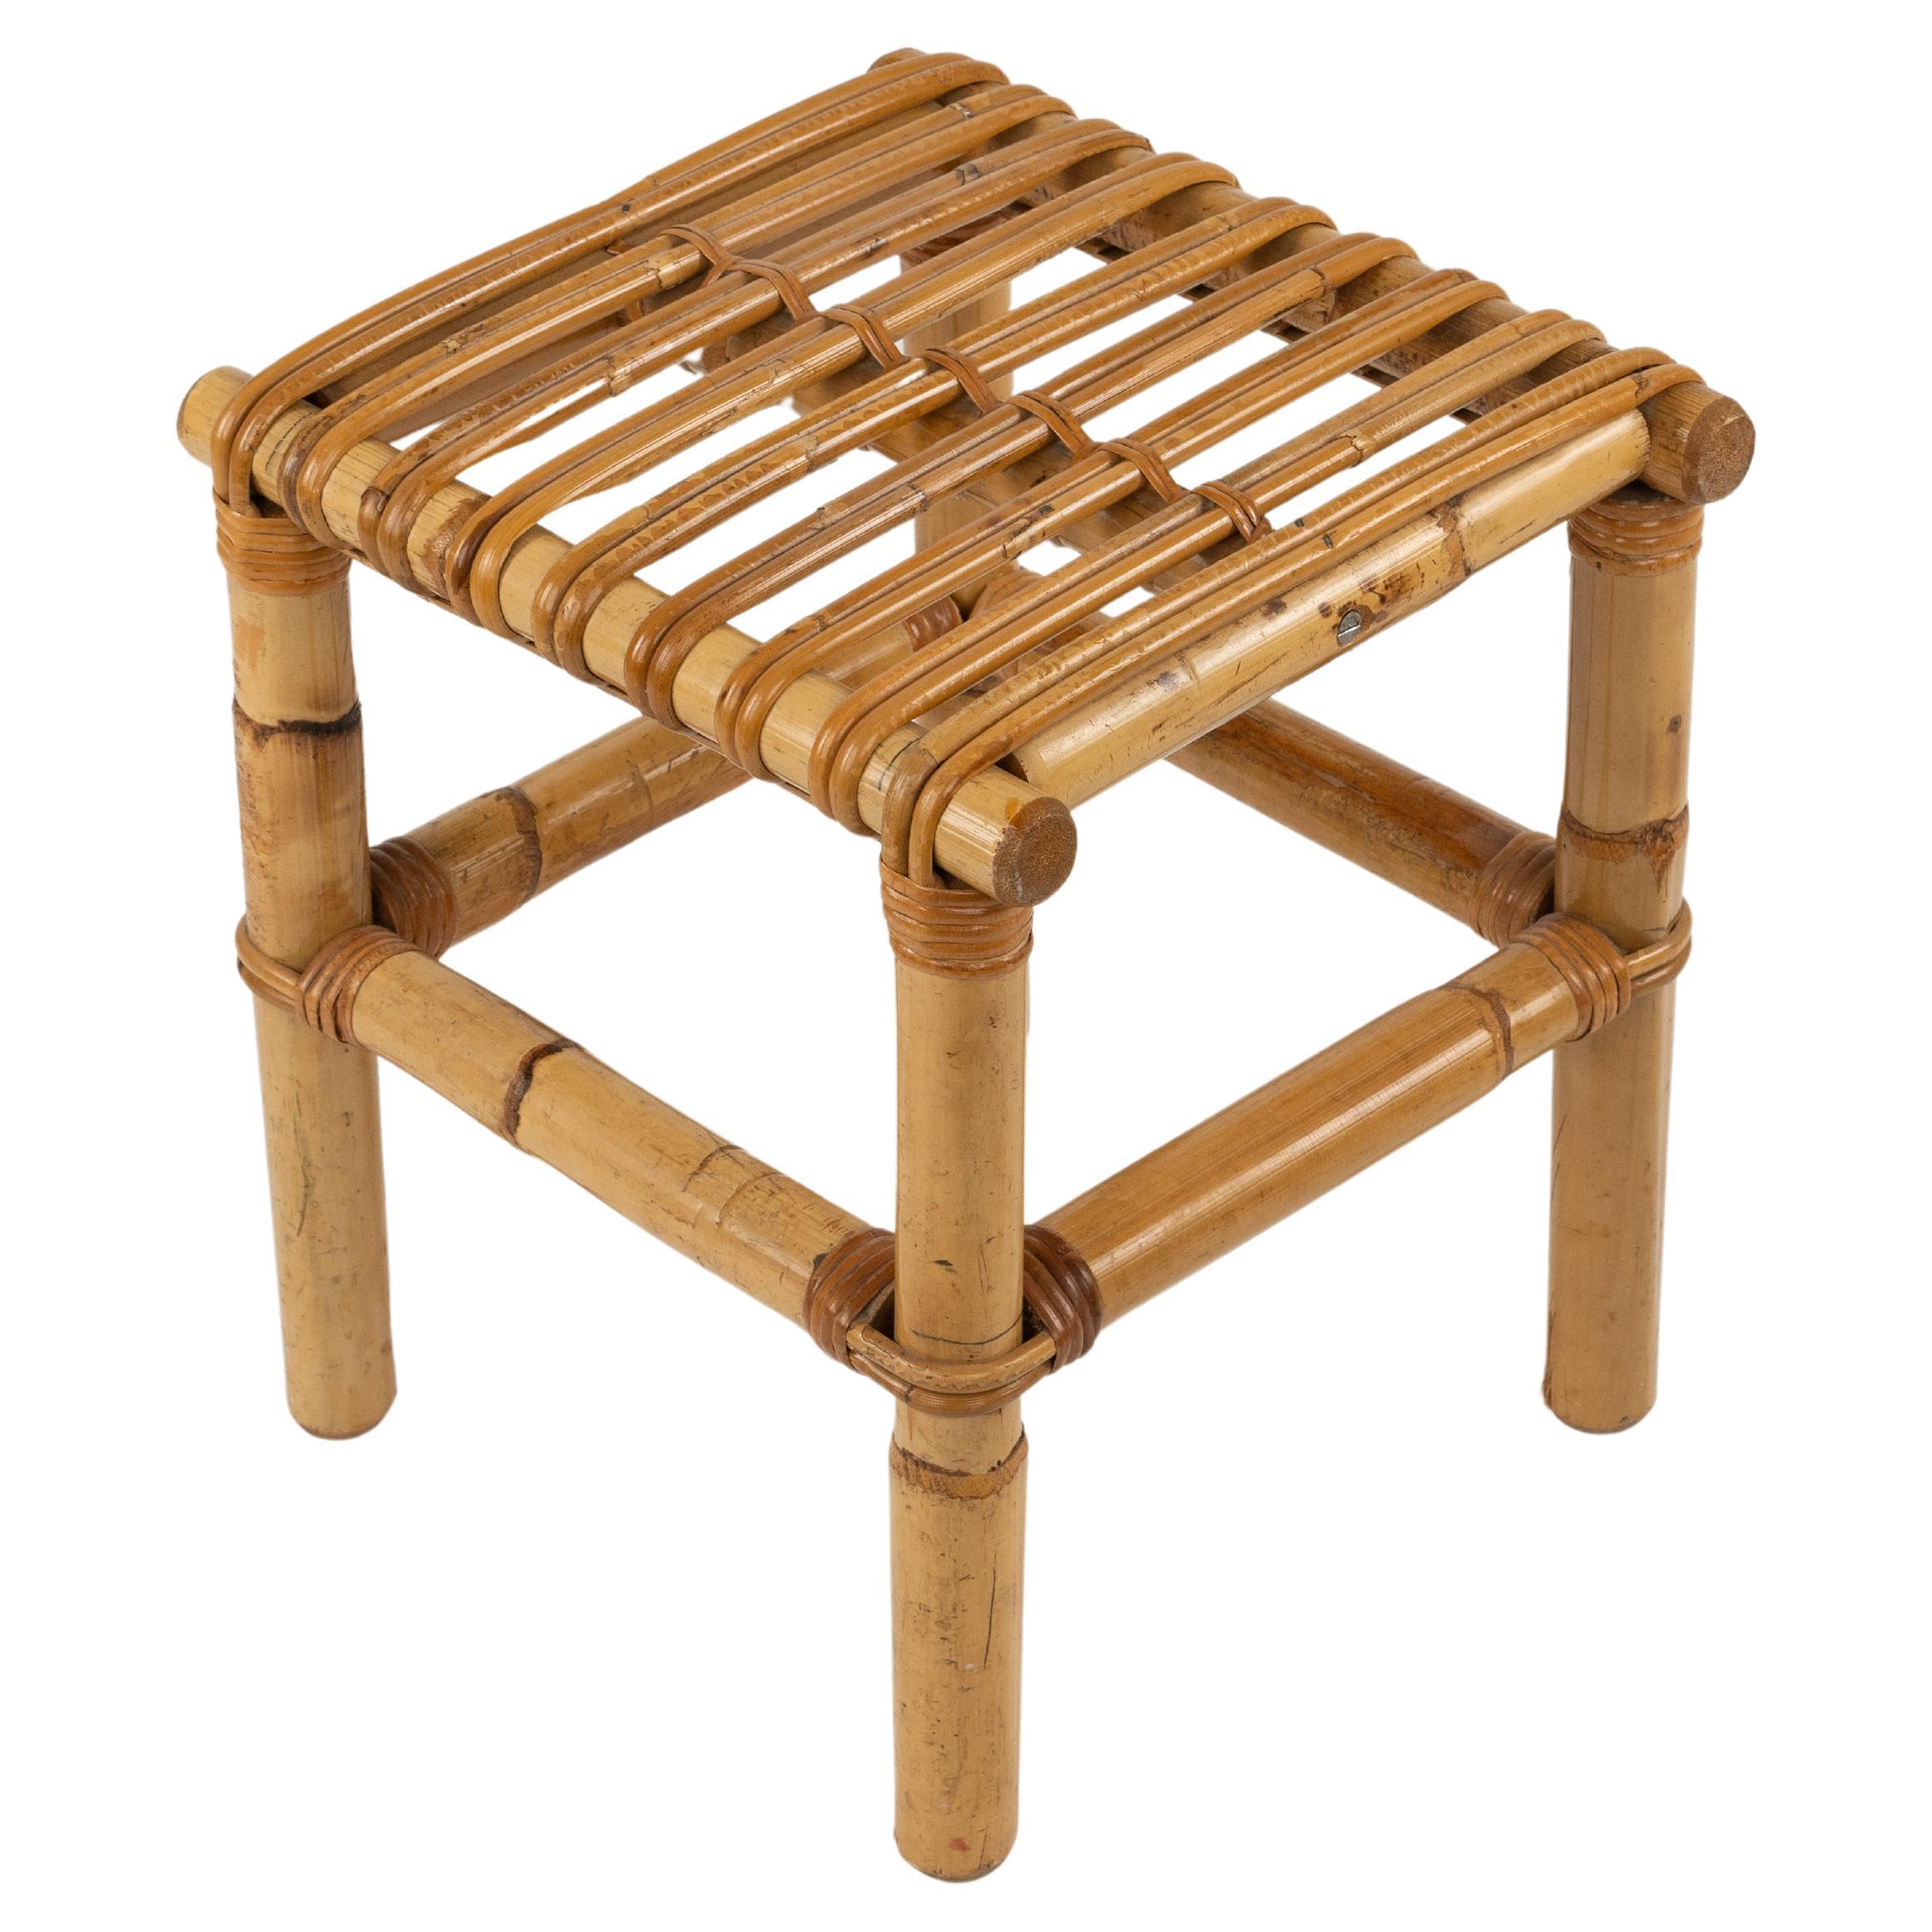 Midcentury Stool or Pouf in Bamboo and Rattan , Italy 1970s For Sale